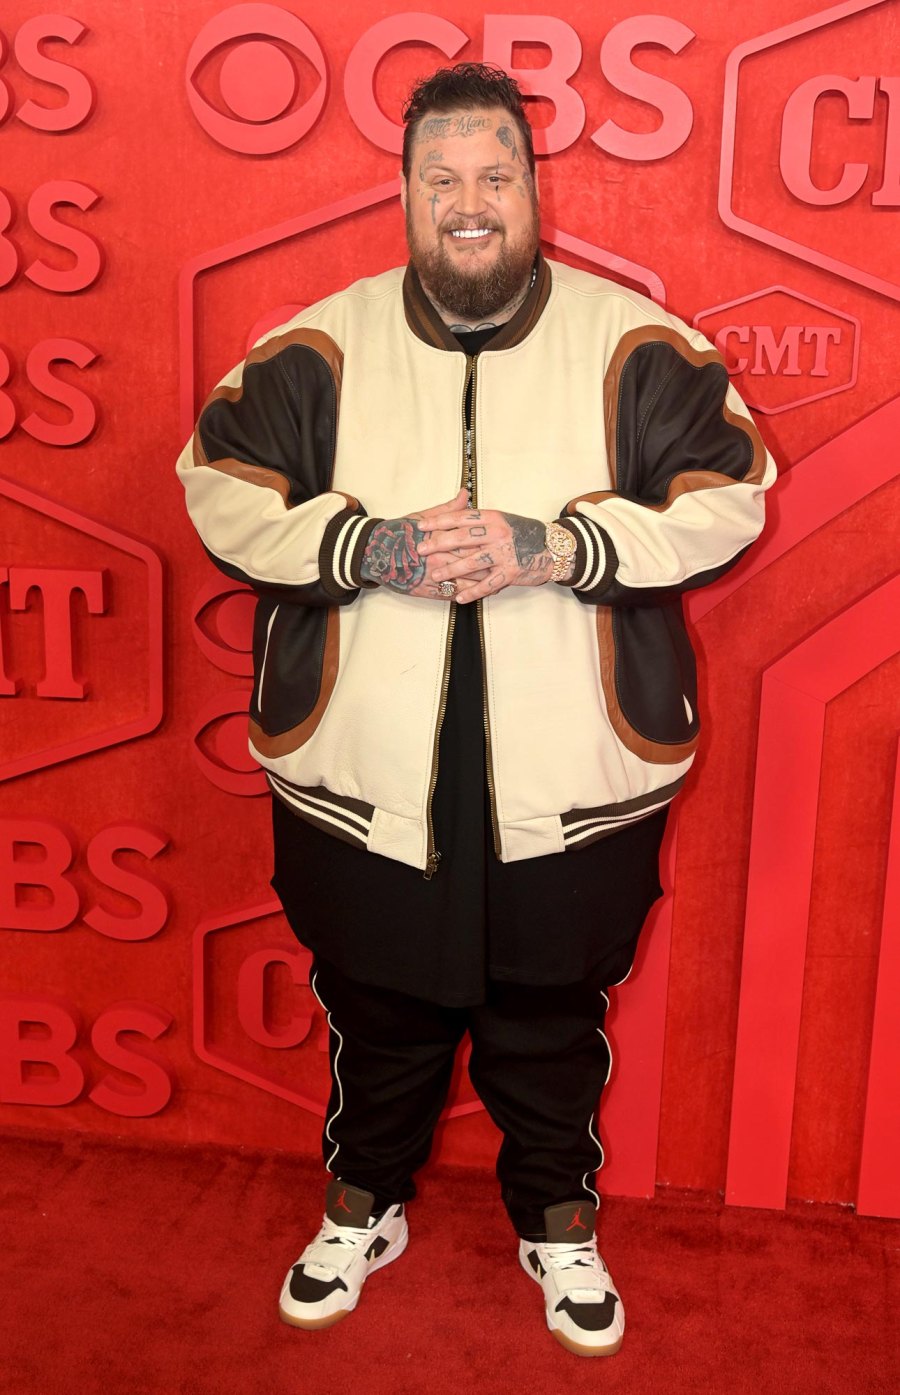 <p>His past may serve as a cautionary tale, but <a href="https://www.usmagazine.com/celebrities/jelly-roll/"><strong>Jelly Roll</strong></a> takes solace in knowing his present-day has become a motivator for many.</p> <p>In <em>Us Weekly</em>’s “Country Stars Love America” issue, the “Save Me” singer, 39, looked back on his whirlwind year and recalled how his past — which included being in and out of jail for a decade — led him to becoming a chart-topper. “There were moments in my life that were so dark, there was absolutely no hope or sense of there being something else [other than] that,” Jelly Roll (real name: Jason Bradley DeFord) told <em>Us</em>. “I wouldn’t have known to dream anything otherwise, and definitely not to the extent of what the past year alone has brought.”</p> <p>And what a year it’s been: Since 2023, Jelly Roll has won multiple awards, celebrated opening a recording studio in his former juvenile detention center and testified in Washington, D.C. about the dangers of fentanyl. Yet, he had an enlightening moment on June 6, when he <a href="https://www.usmagazine.com/entertainment/news/behind-the-scenes-at-cma-fest-2024-performances-artist-interviews/">performed at CMA Fest</a> at Nissan Stadium — which shares a parking lot with the juvenile detention center he spent time in as a teenager — in Nashville.</p> <p>“I could hear the football games and the concerts from the cell I was in, and I just headlined a show for more than 50,000 people, and hosted the CMA Fest TV special there,” he shared. “I was standing in the same exact place [at] a completely different place in life.”</p> <p><a href="https://www.usmagazine.com/celebrity-moms/news/jelly-rolls-family-guide-meet-his-two-children-and-wife-bunnie-xo/">Jelly Roll’s Family Guide: Meet His Two Children and Wife Bunnie XO</a></p> <p>“I don’t know if there is a moment of more perspective than that to illustrate how different my life could have been and how different it is now,” the “I Am Not Okay” singer continued.</p> <p>According to the musician, the awards and accolades mean nothing if he’s not using his platform to pay it forward. “I want to let people know they are not alone in what they are going through, and that there is something ahead that can be so much greater than what you could have imagined if you are able to commit to making the change you need to,” he told <em>Us</em>. “I want to keep reminding people the windshield is bigger than the rearview mirror for a reason.”</p> <p>“Music granted [me] purpose and enabled me to reach people,” he added. “I hope my story inspires them to find whatever that is for them.”</p> <p>Here, Jelly Roll recounts his recent incredible run in his own words before hitting the road for the <em><a href="https://jellyroll615.com/pages/2024-headline-tour">Beautifully Broken Tour</a></em>, kicking off August 27.</p>